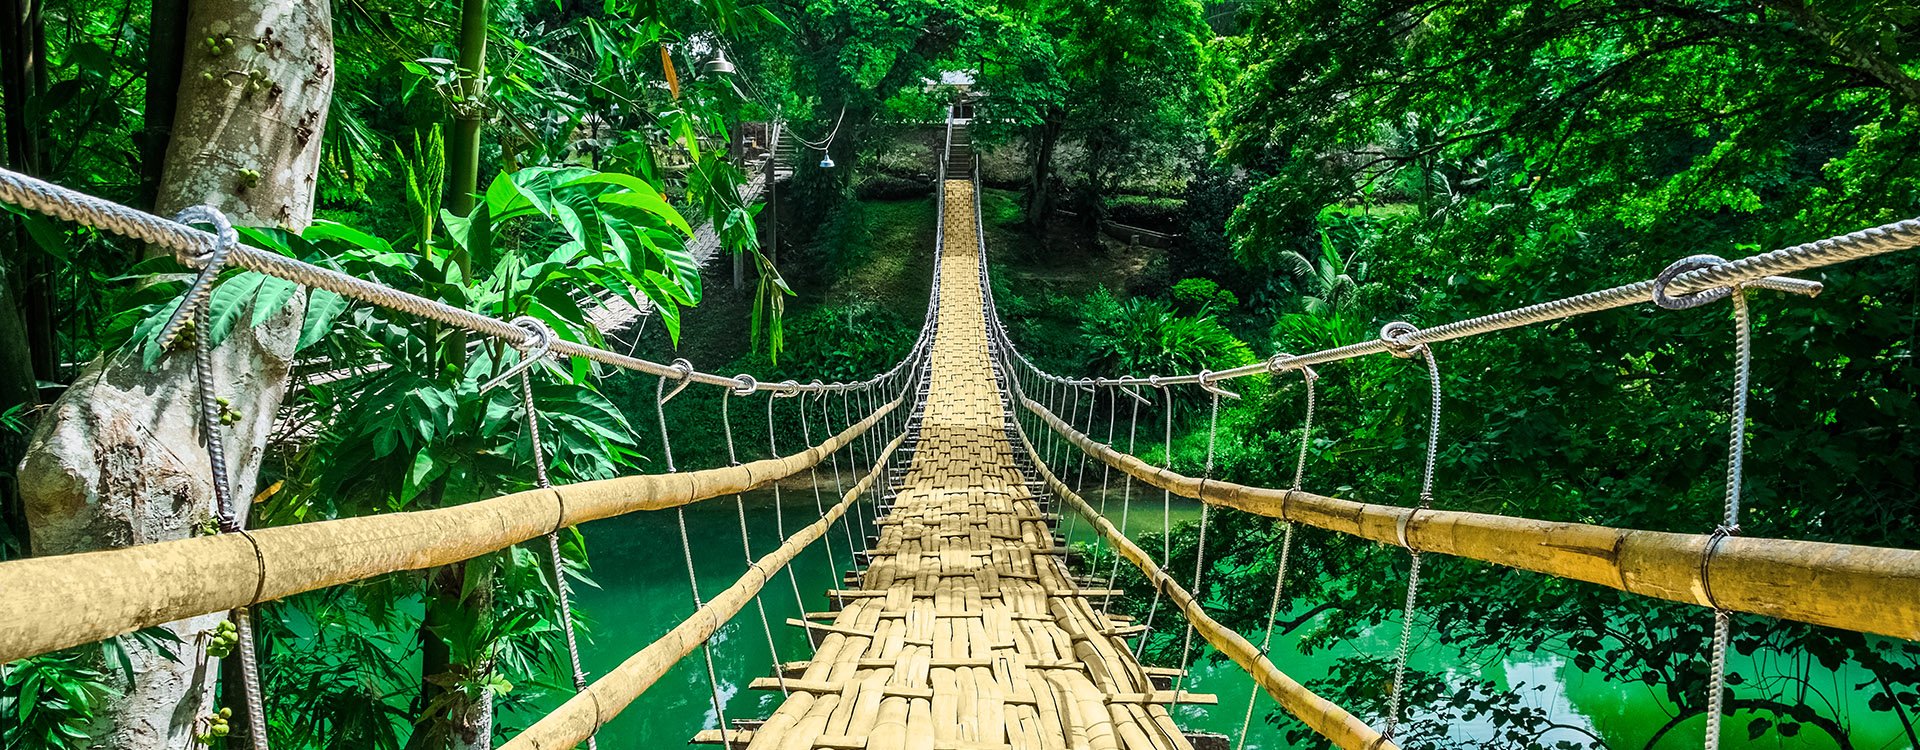 Bamboo pedestrian hanging bridge over river in tropical forest, Bohol, Philippines